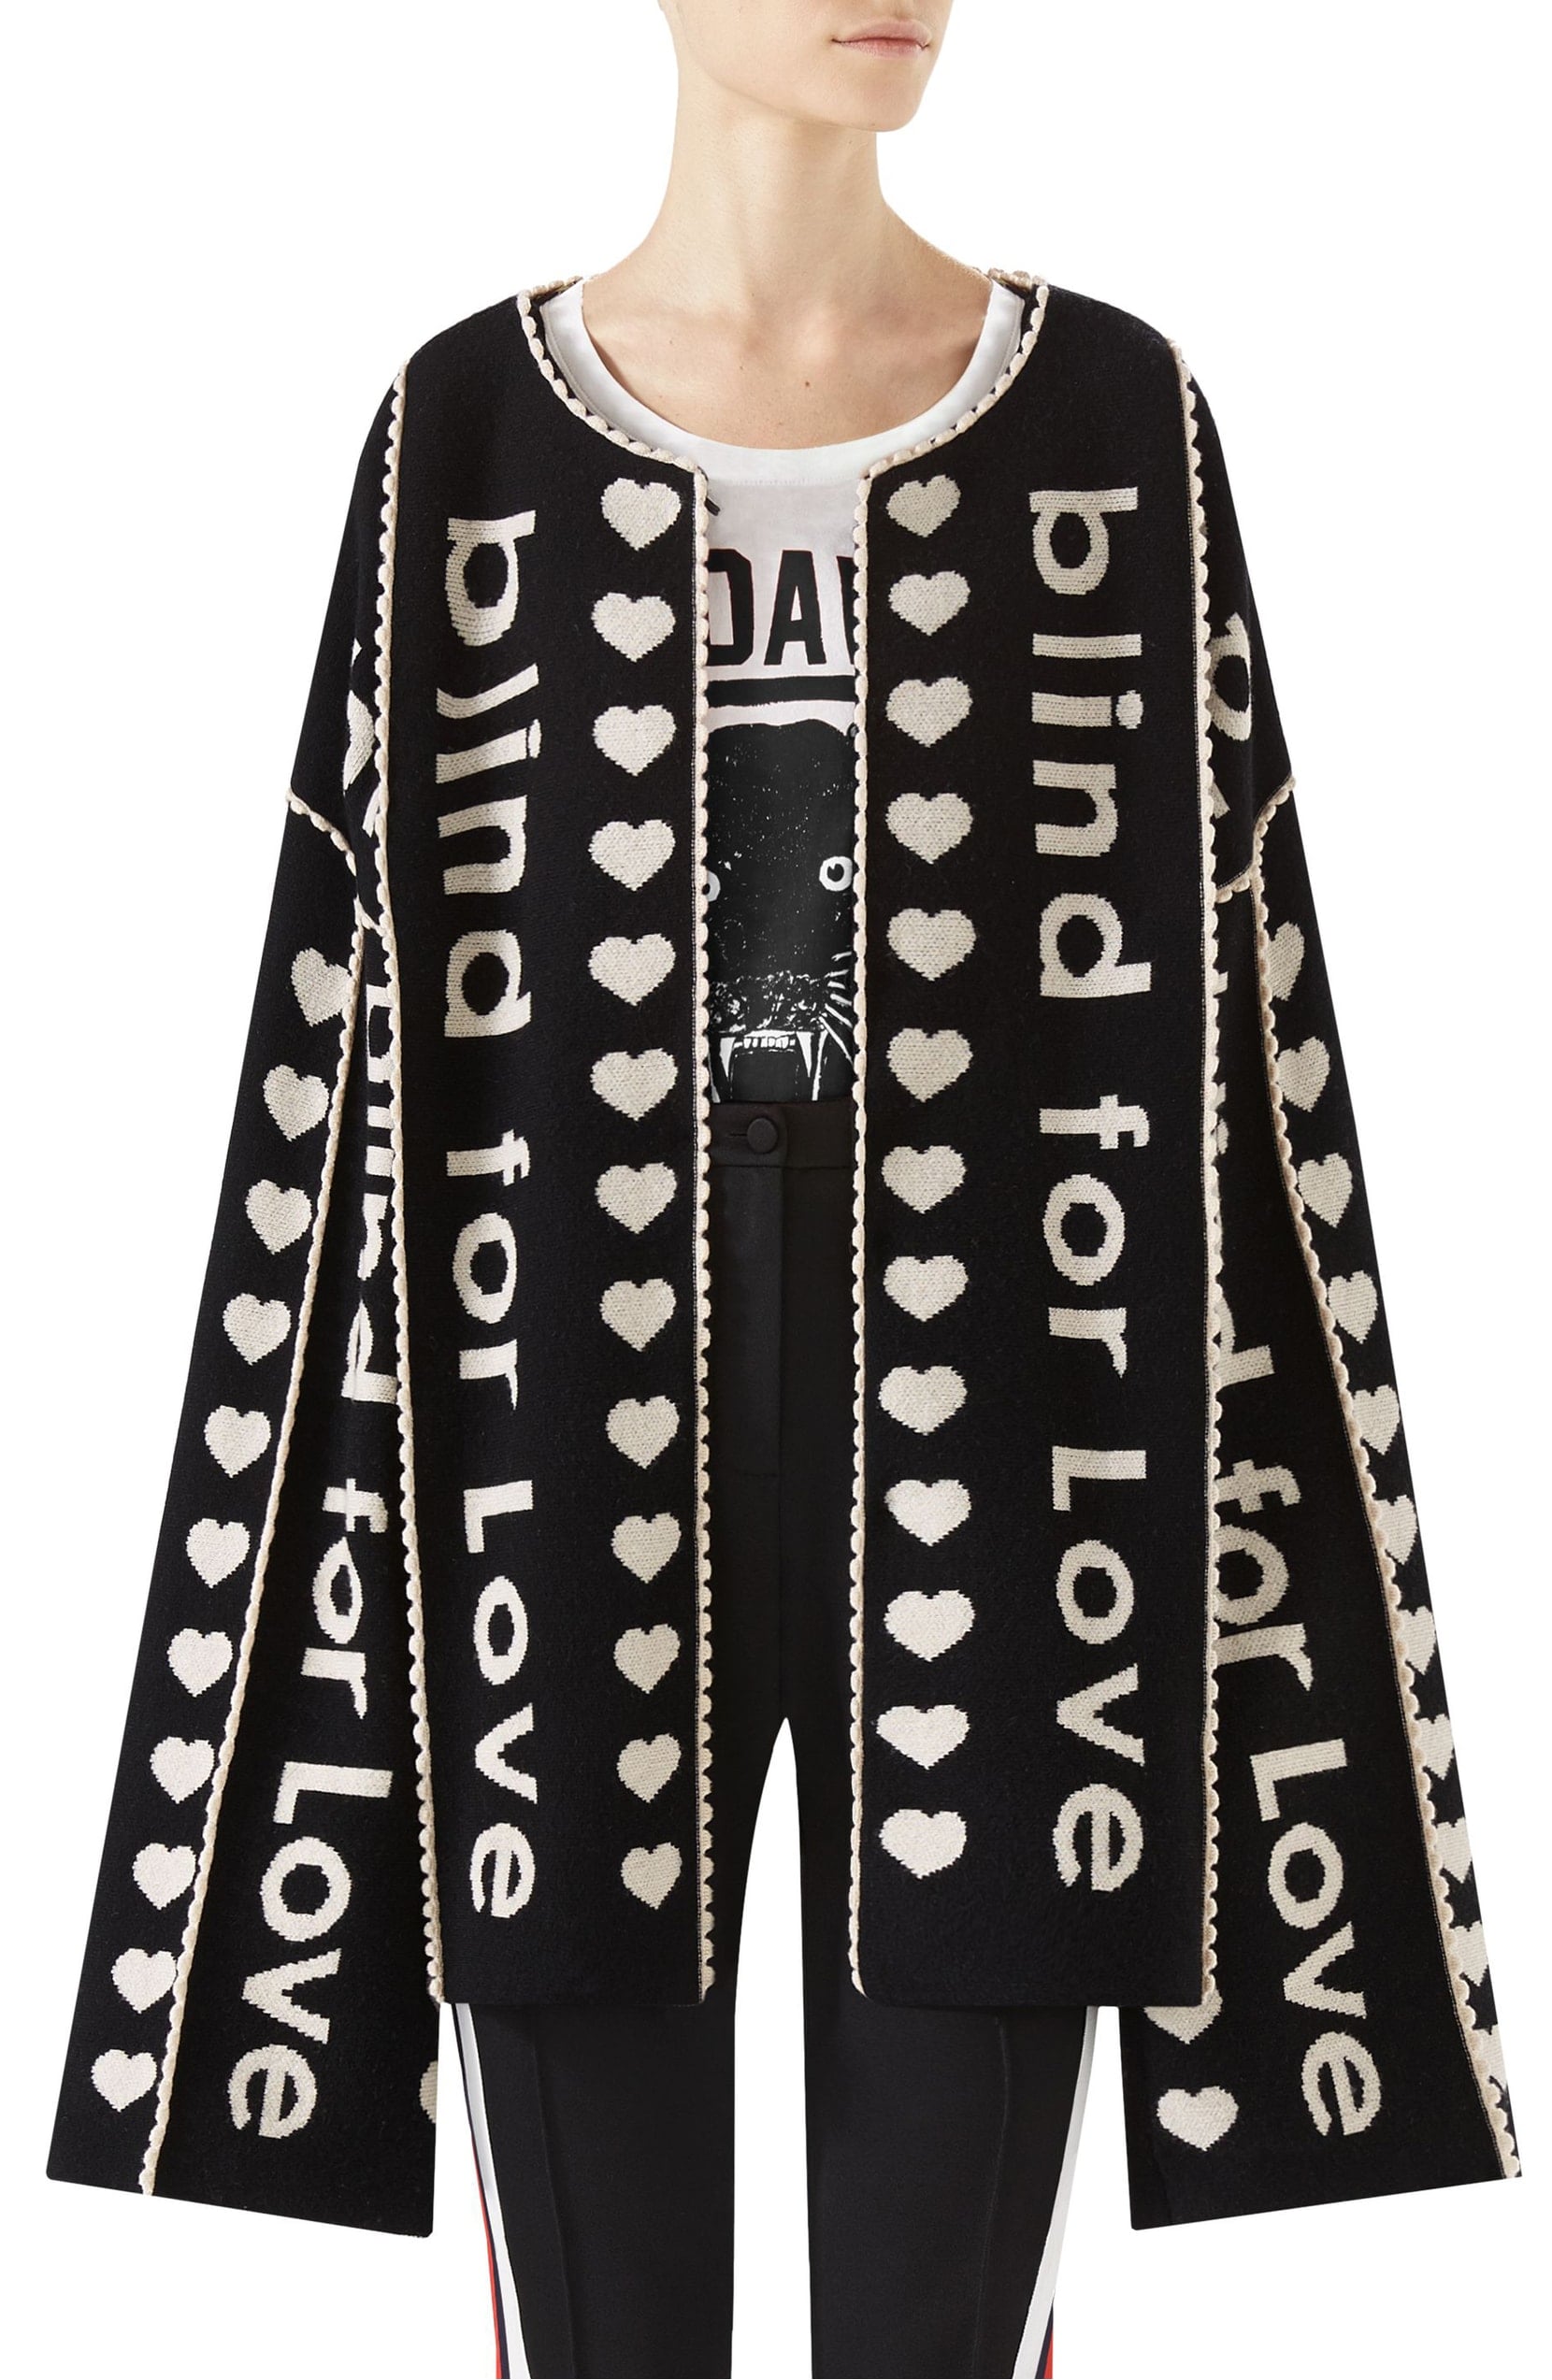 strand vokse op eksplosion Gucci Blind For Love Jacquard Sweater Coat | My Wallet Is Crying — That's  How Special These Gucci Sweaters Are | POPSUGAR Fashion Photo 9